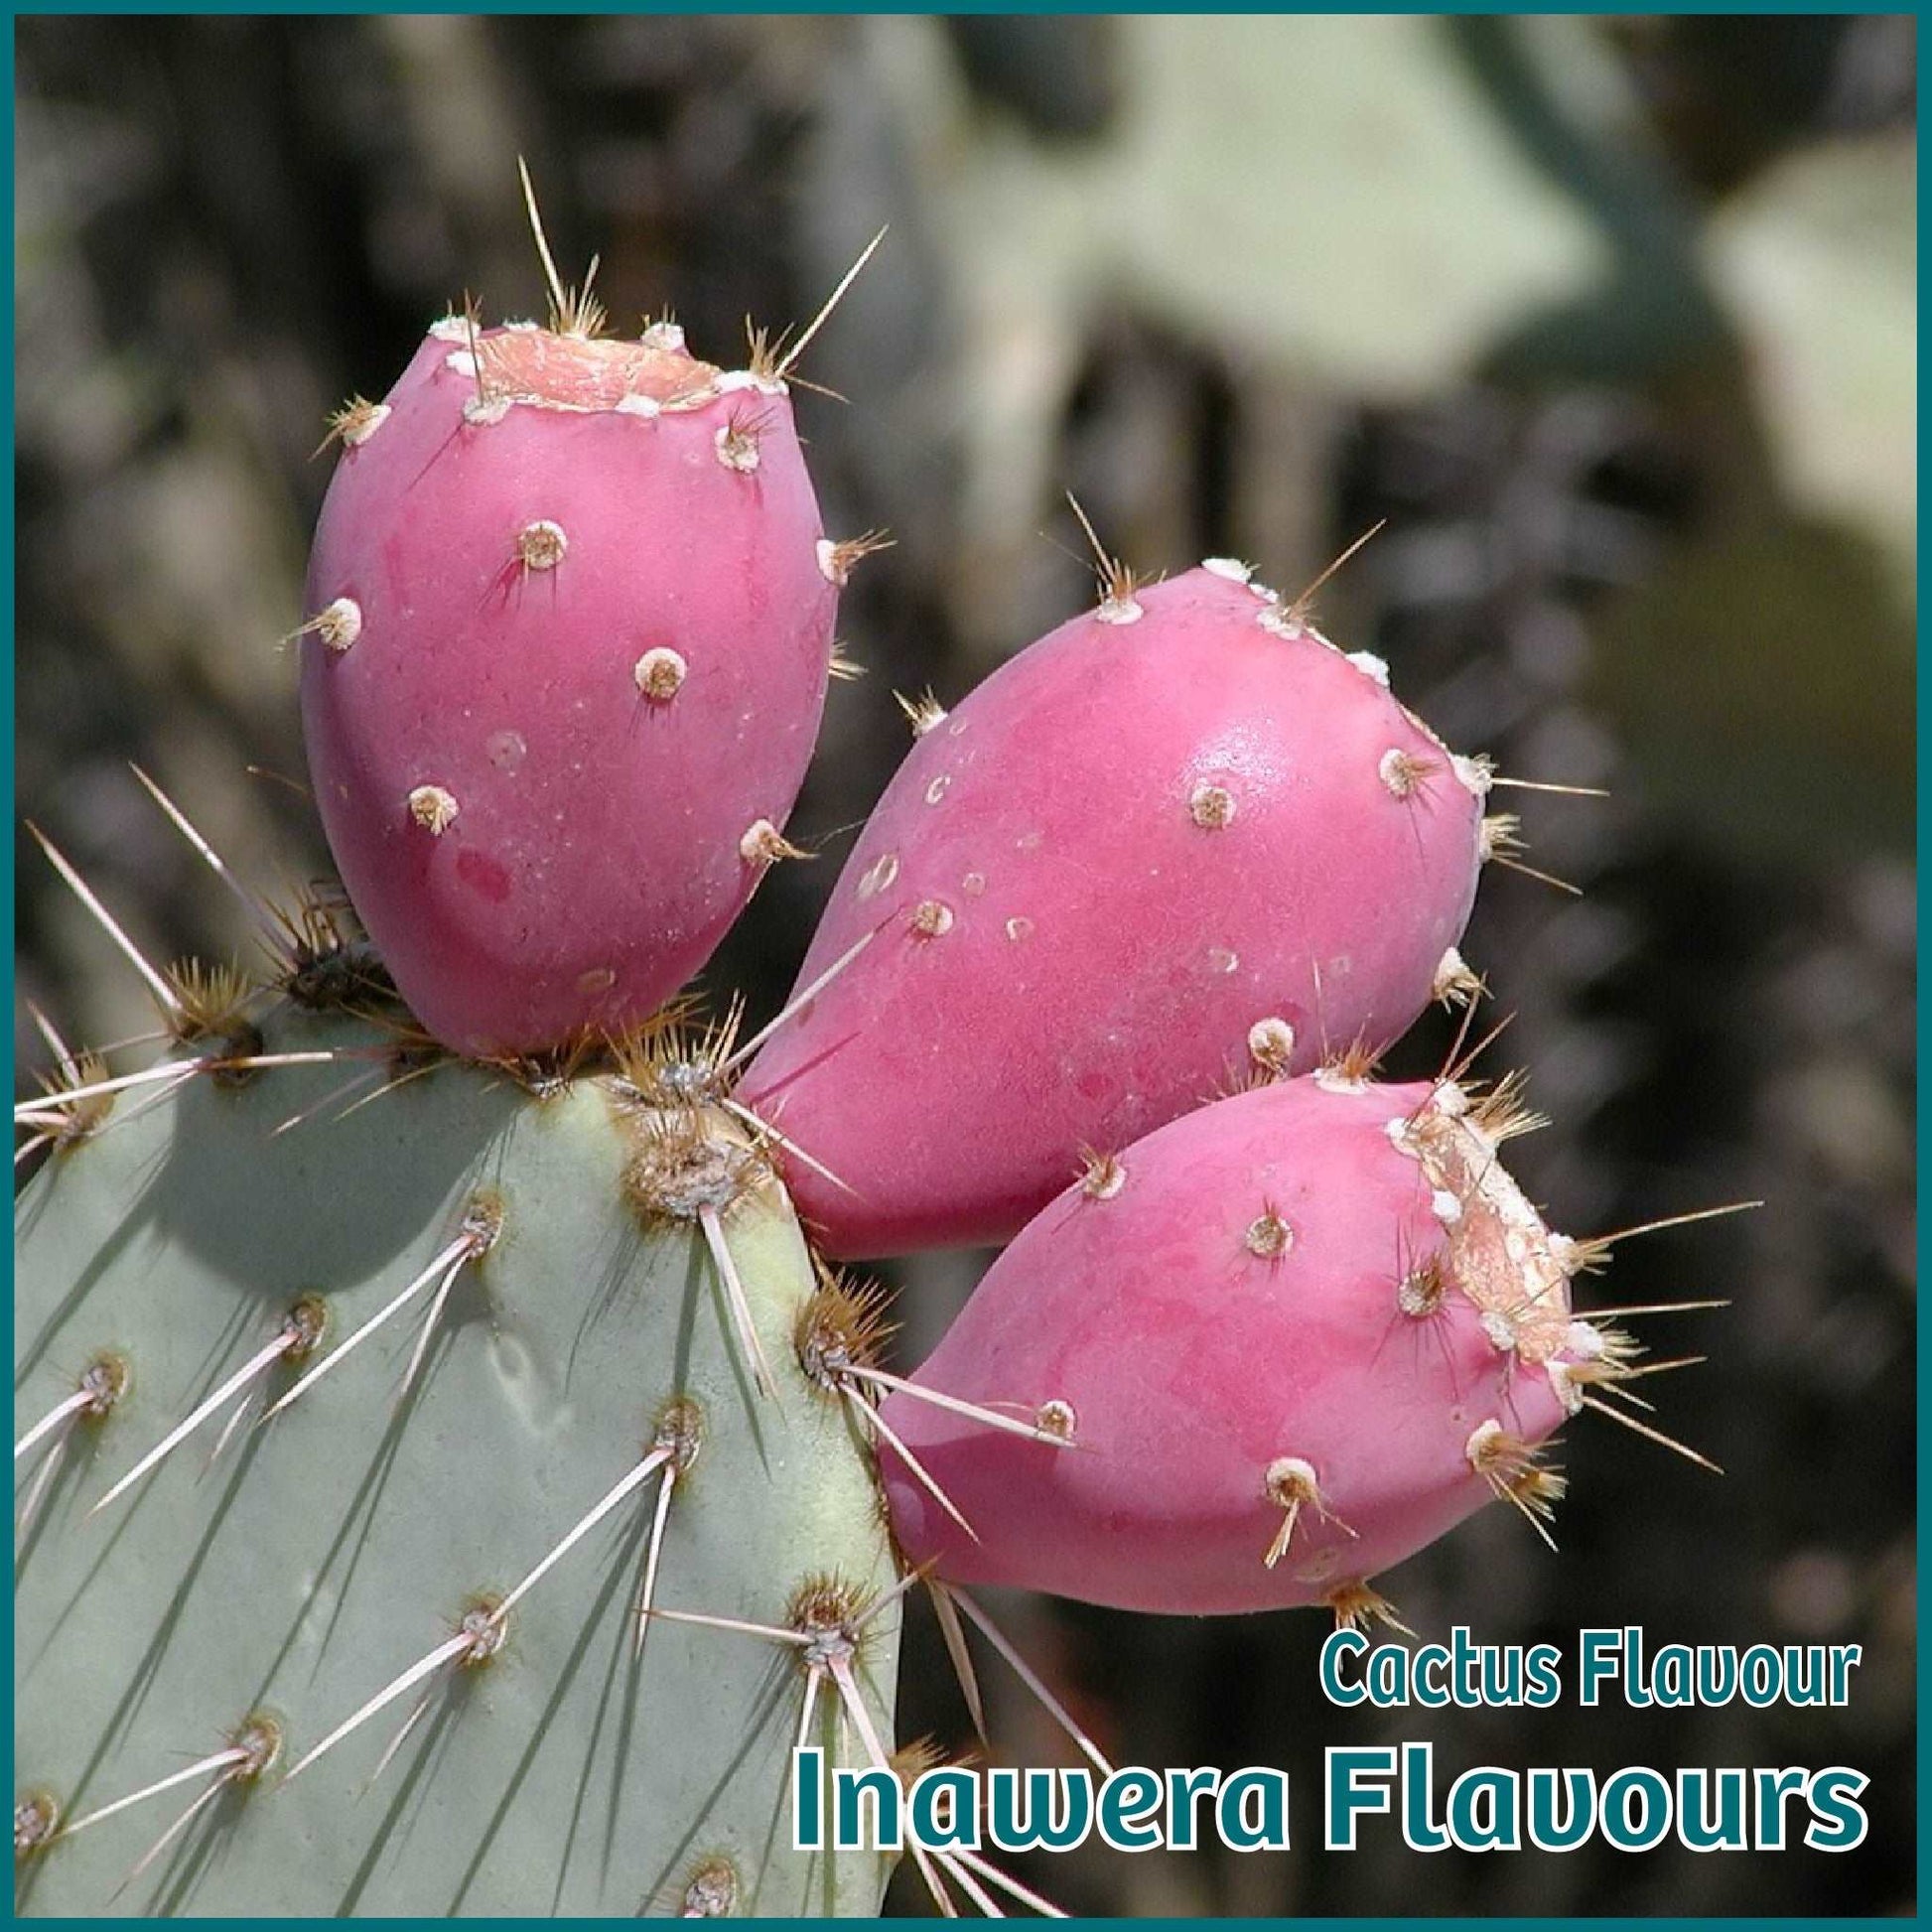 Cactus Flavour- Inawera - Flavour Fog - Canada's flavour depot.